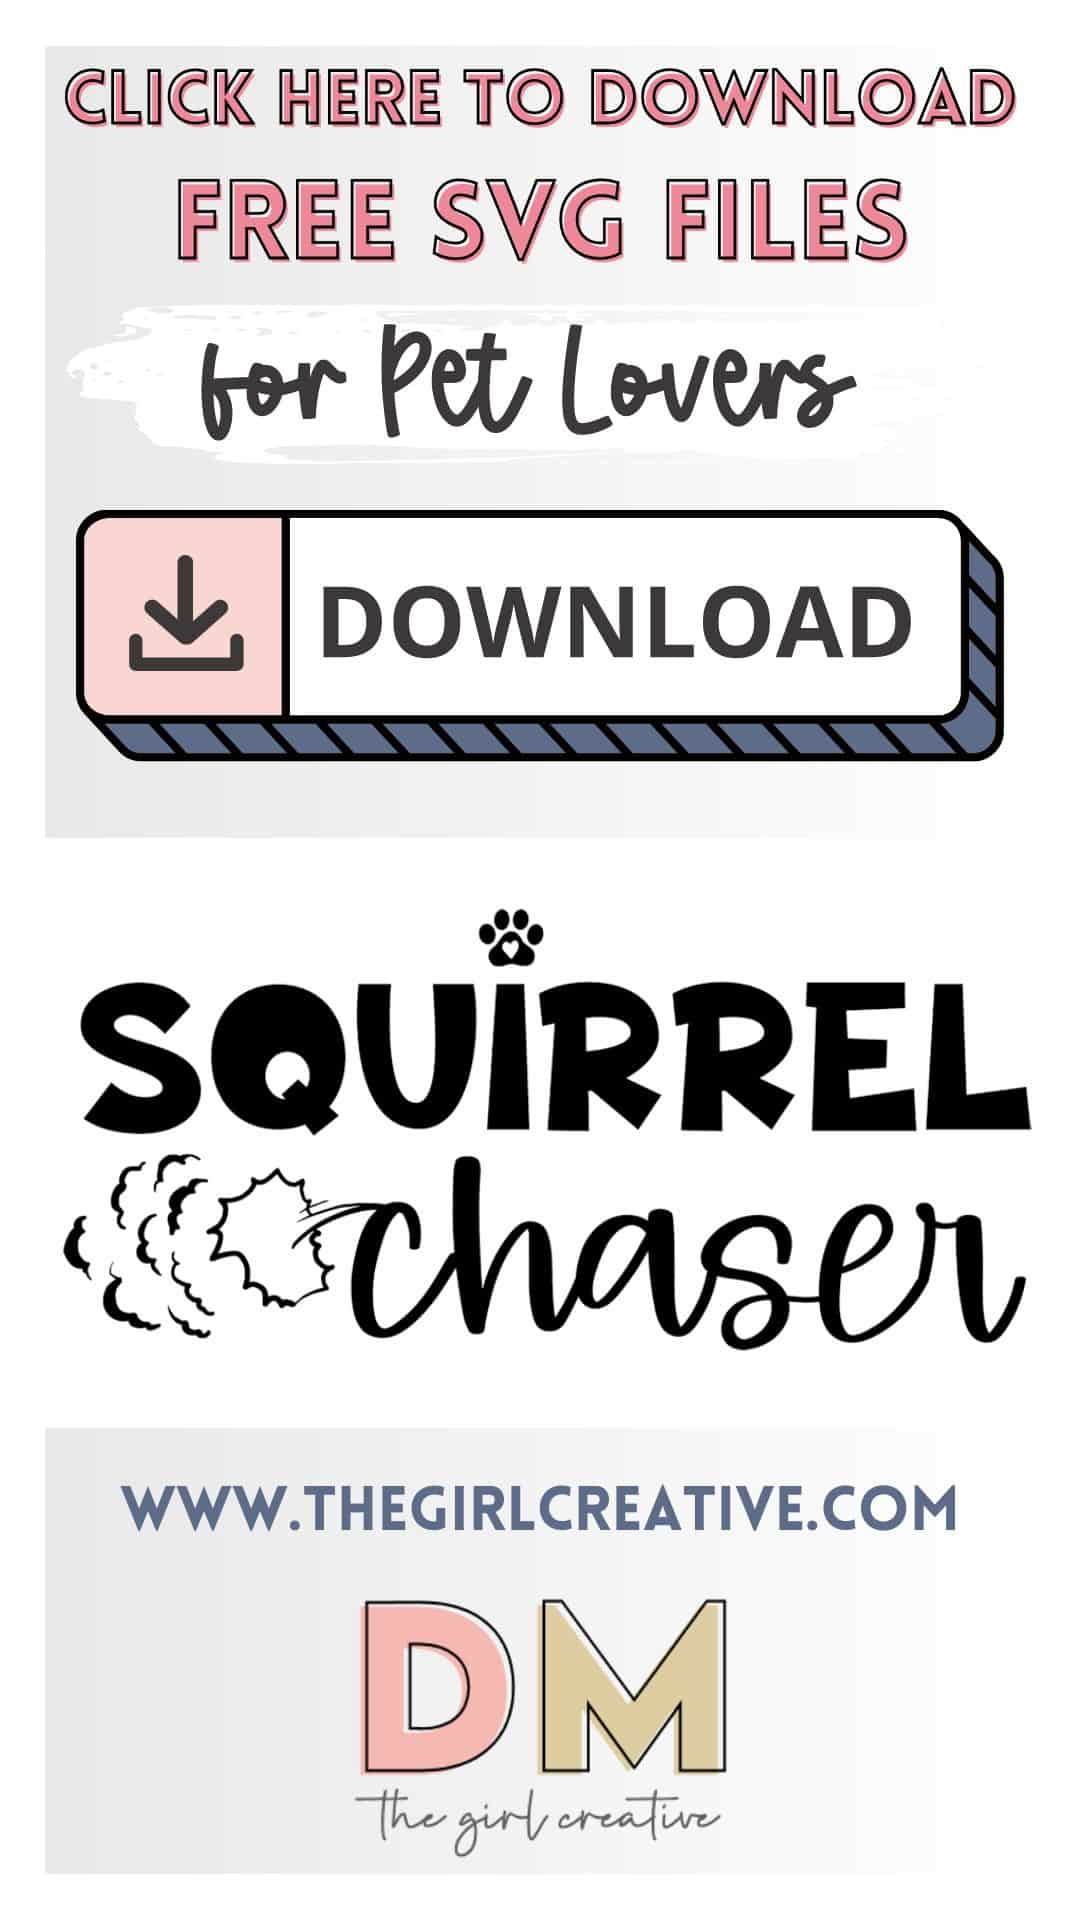 Squirrel Chaser SVG Download Graphic NEW